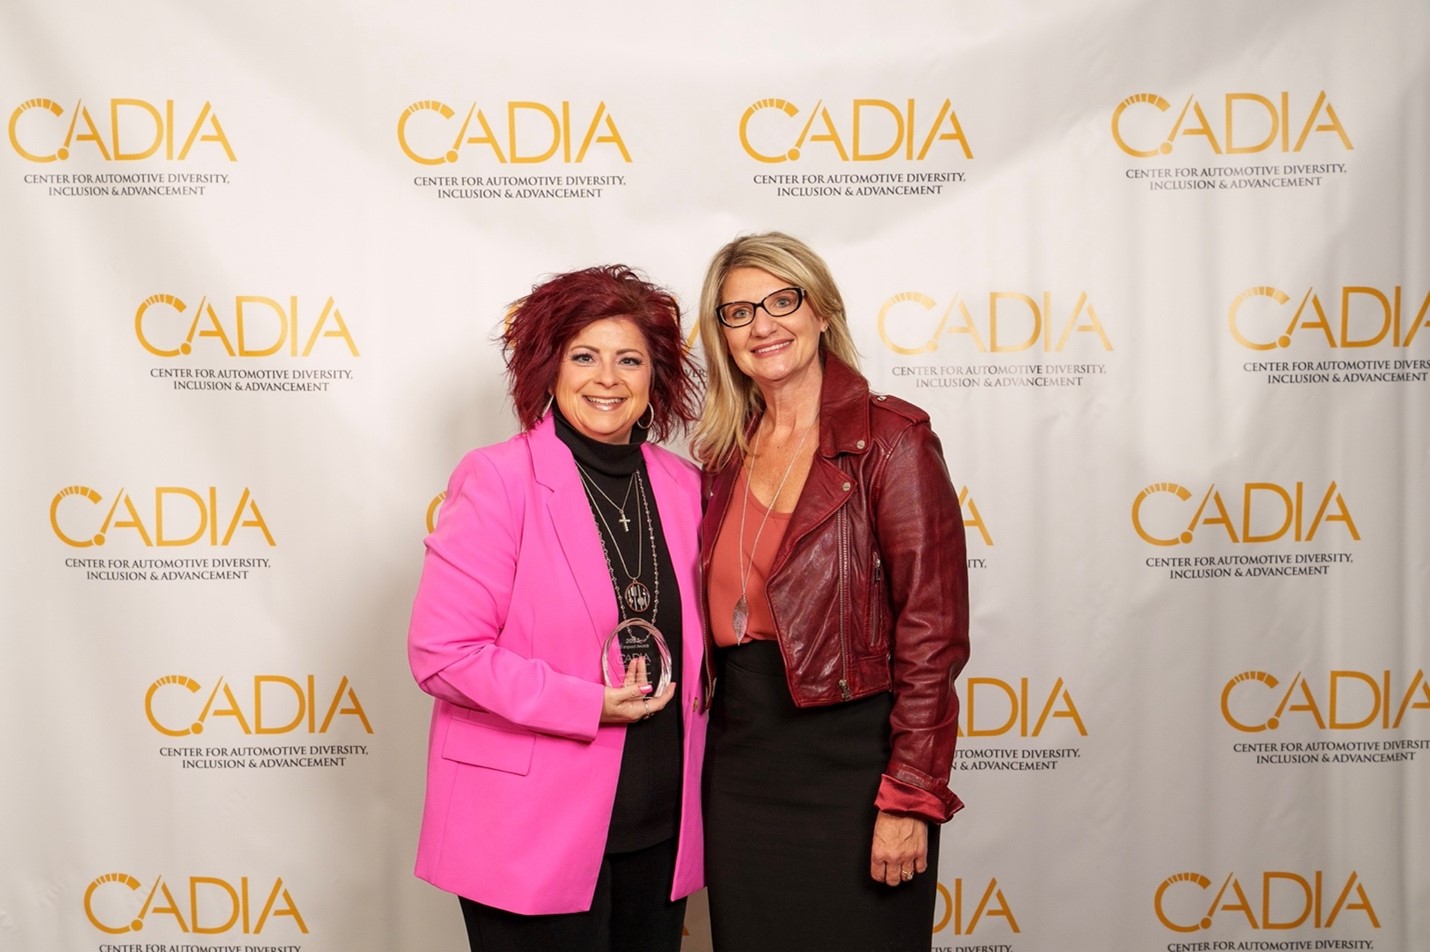 Deanna Lorincz, Global Director Communications and Marketing accepts the 2023 CADIA Impact Award receiving overall recognition in the category of Leadership Commitment. Photo Credit: CADIA/Nadir Ali